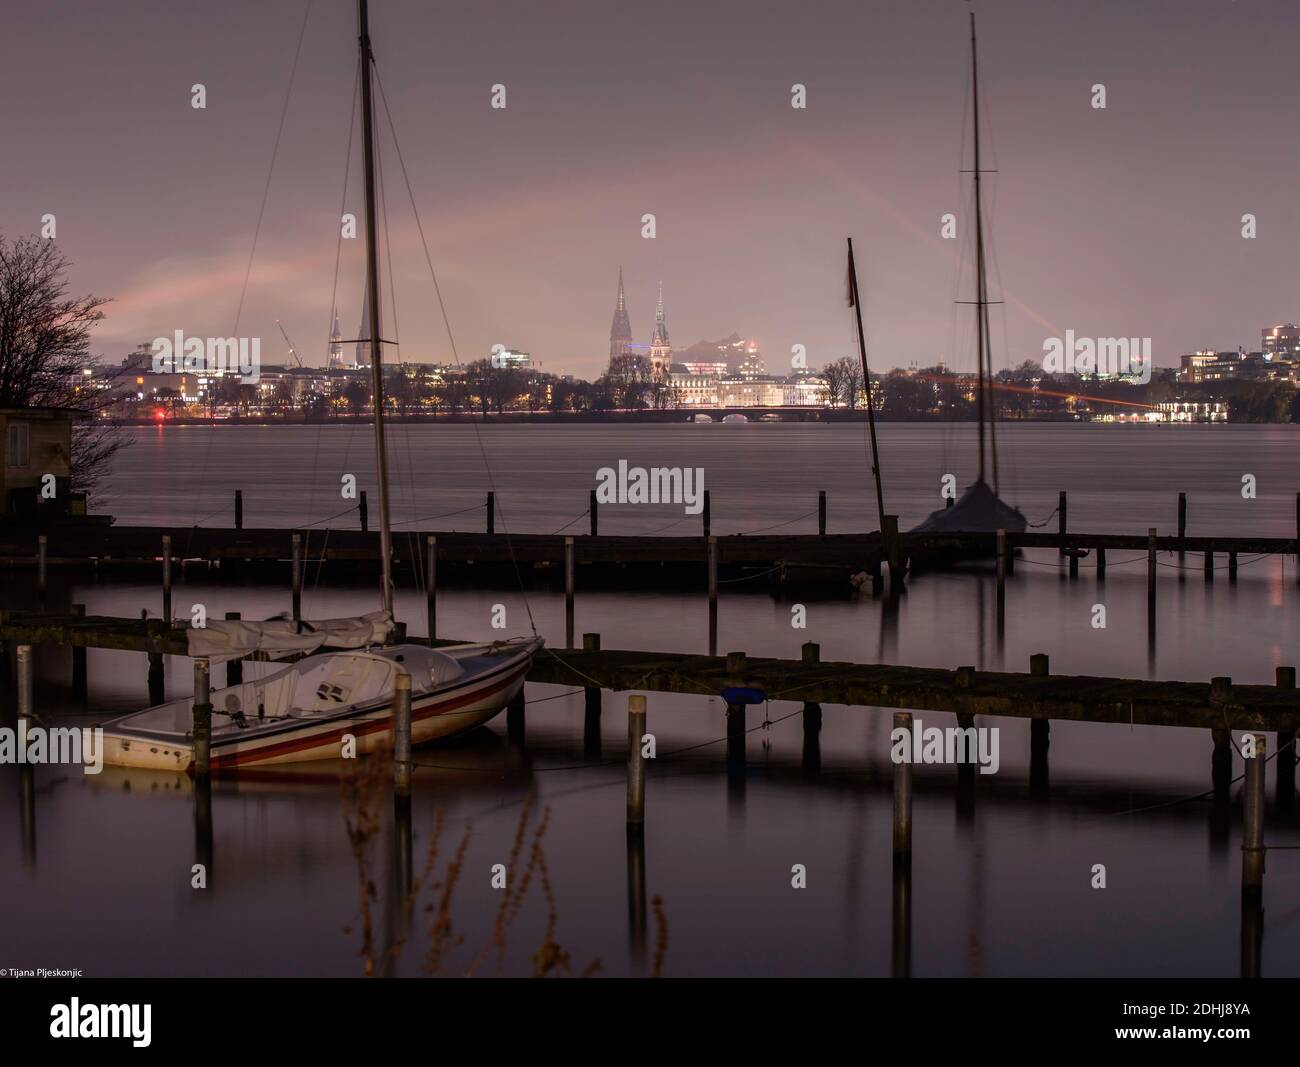 Cold but enlightened November evenings on Alster Stock Photo